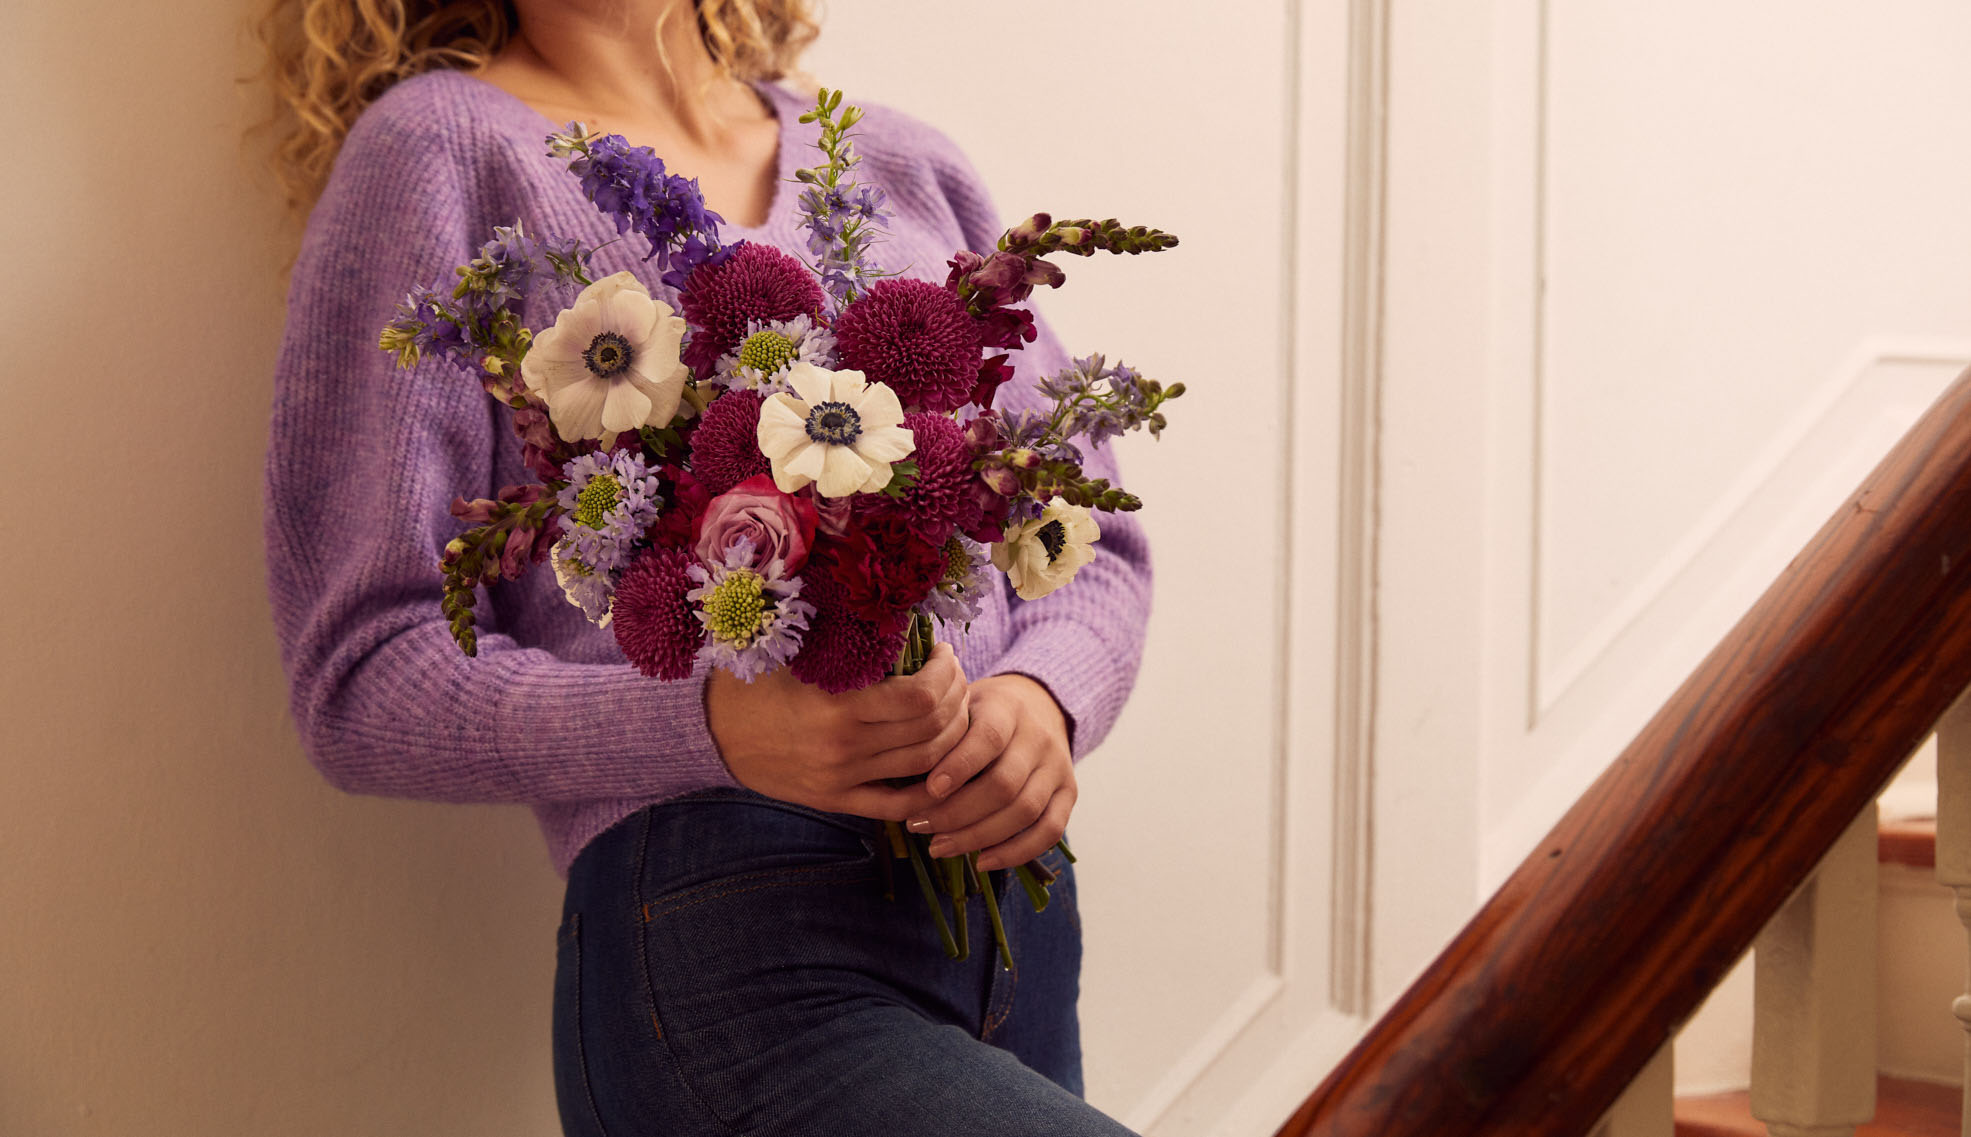 Woman holding a bouquet with purple mums